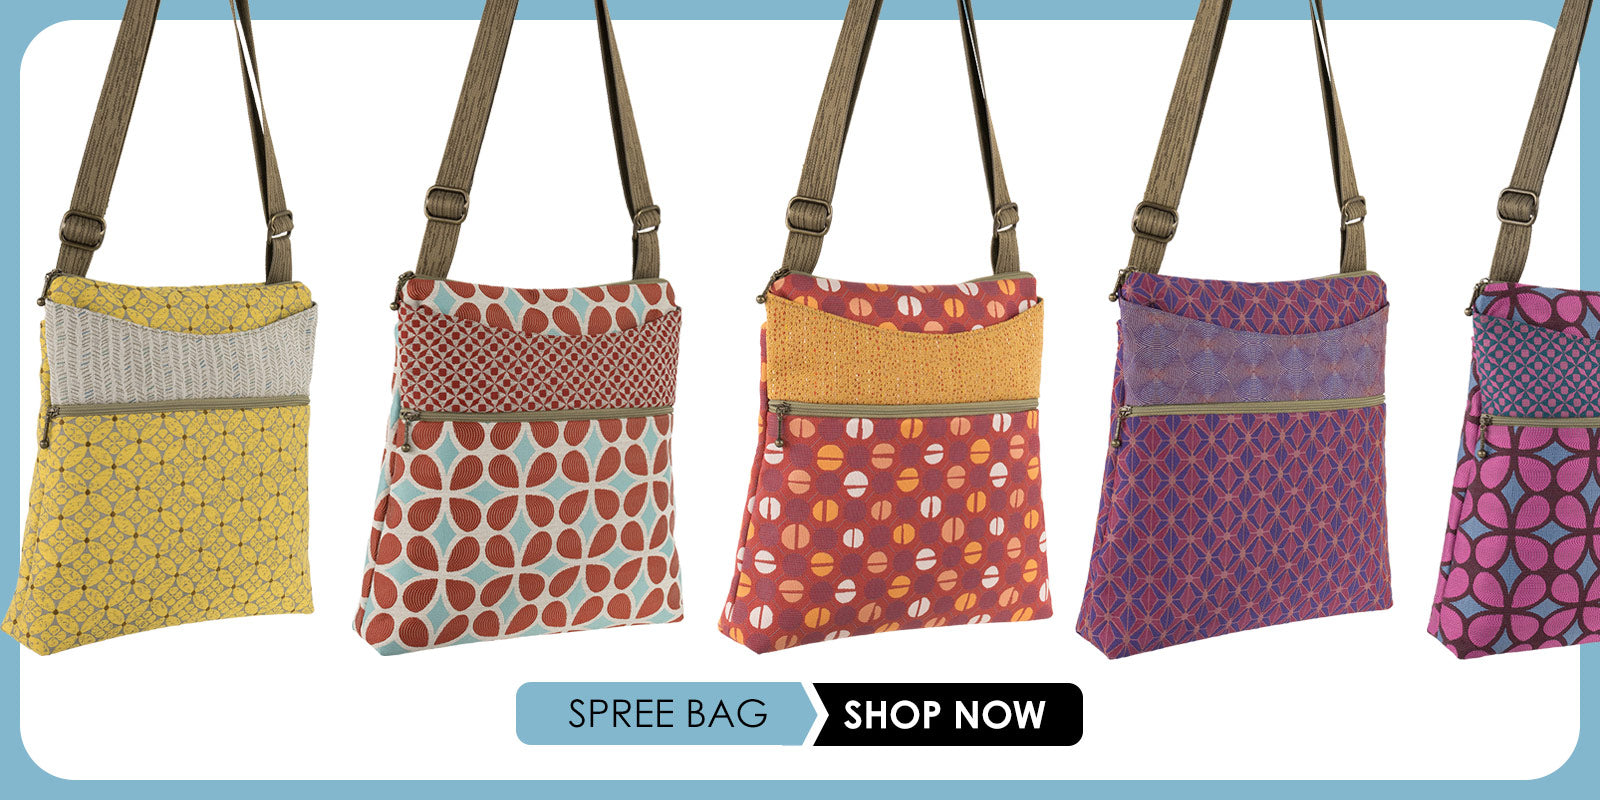 Shop Our Top Seller, the Spree Bag!